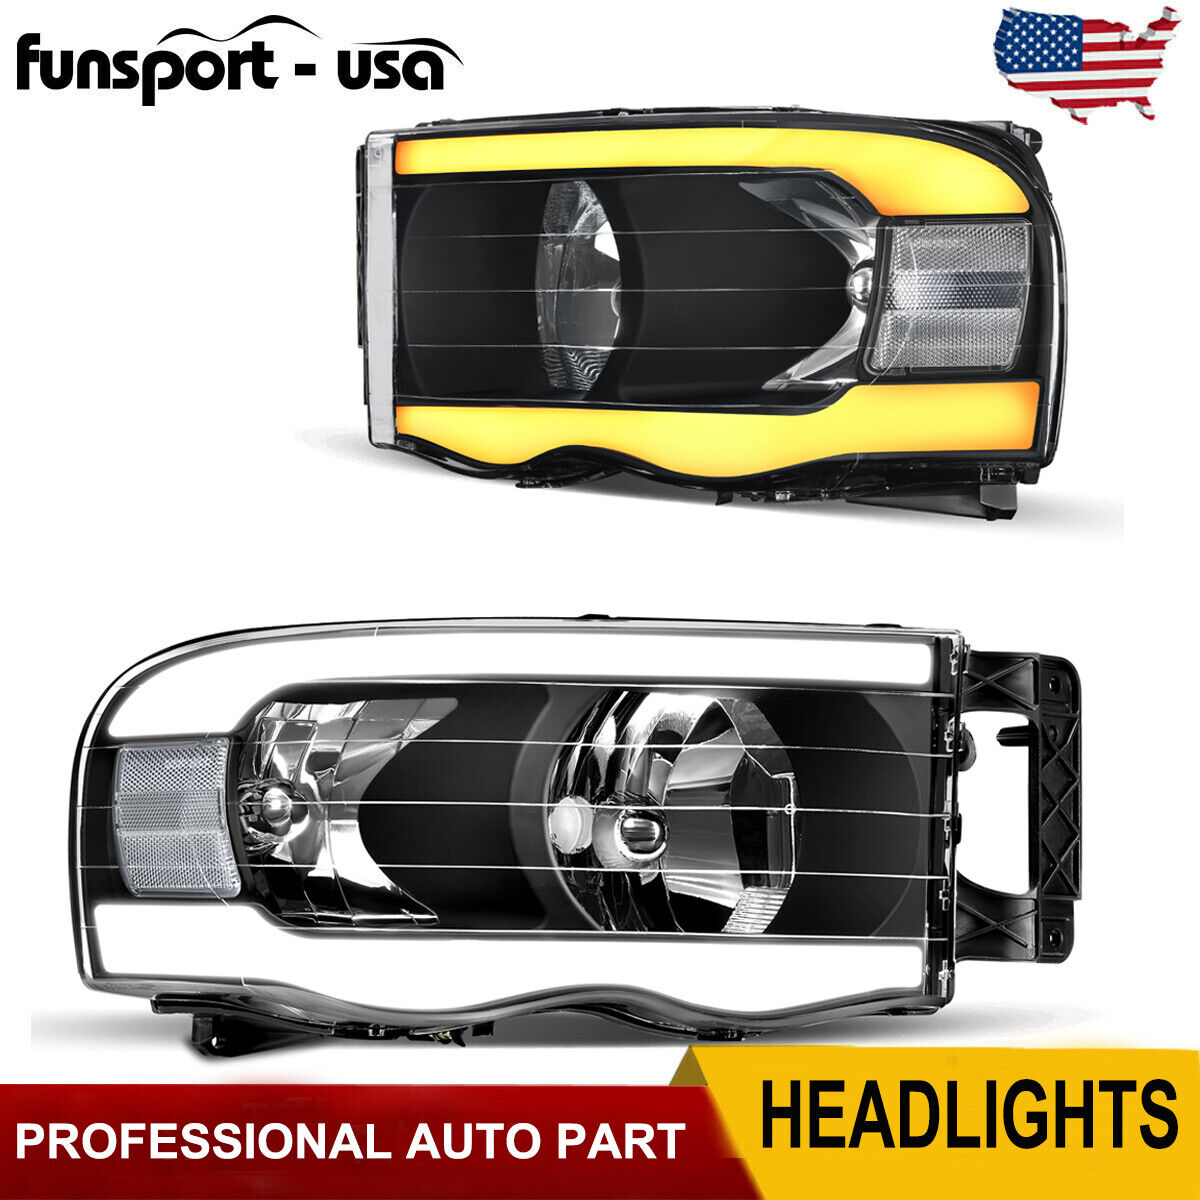 [LED DRL] FOR 2002-2005 DODGE RAM 1500 BLACK SEQUENTIAL TURN SIGNAL HEADLIGHTS